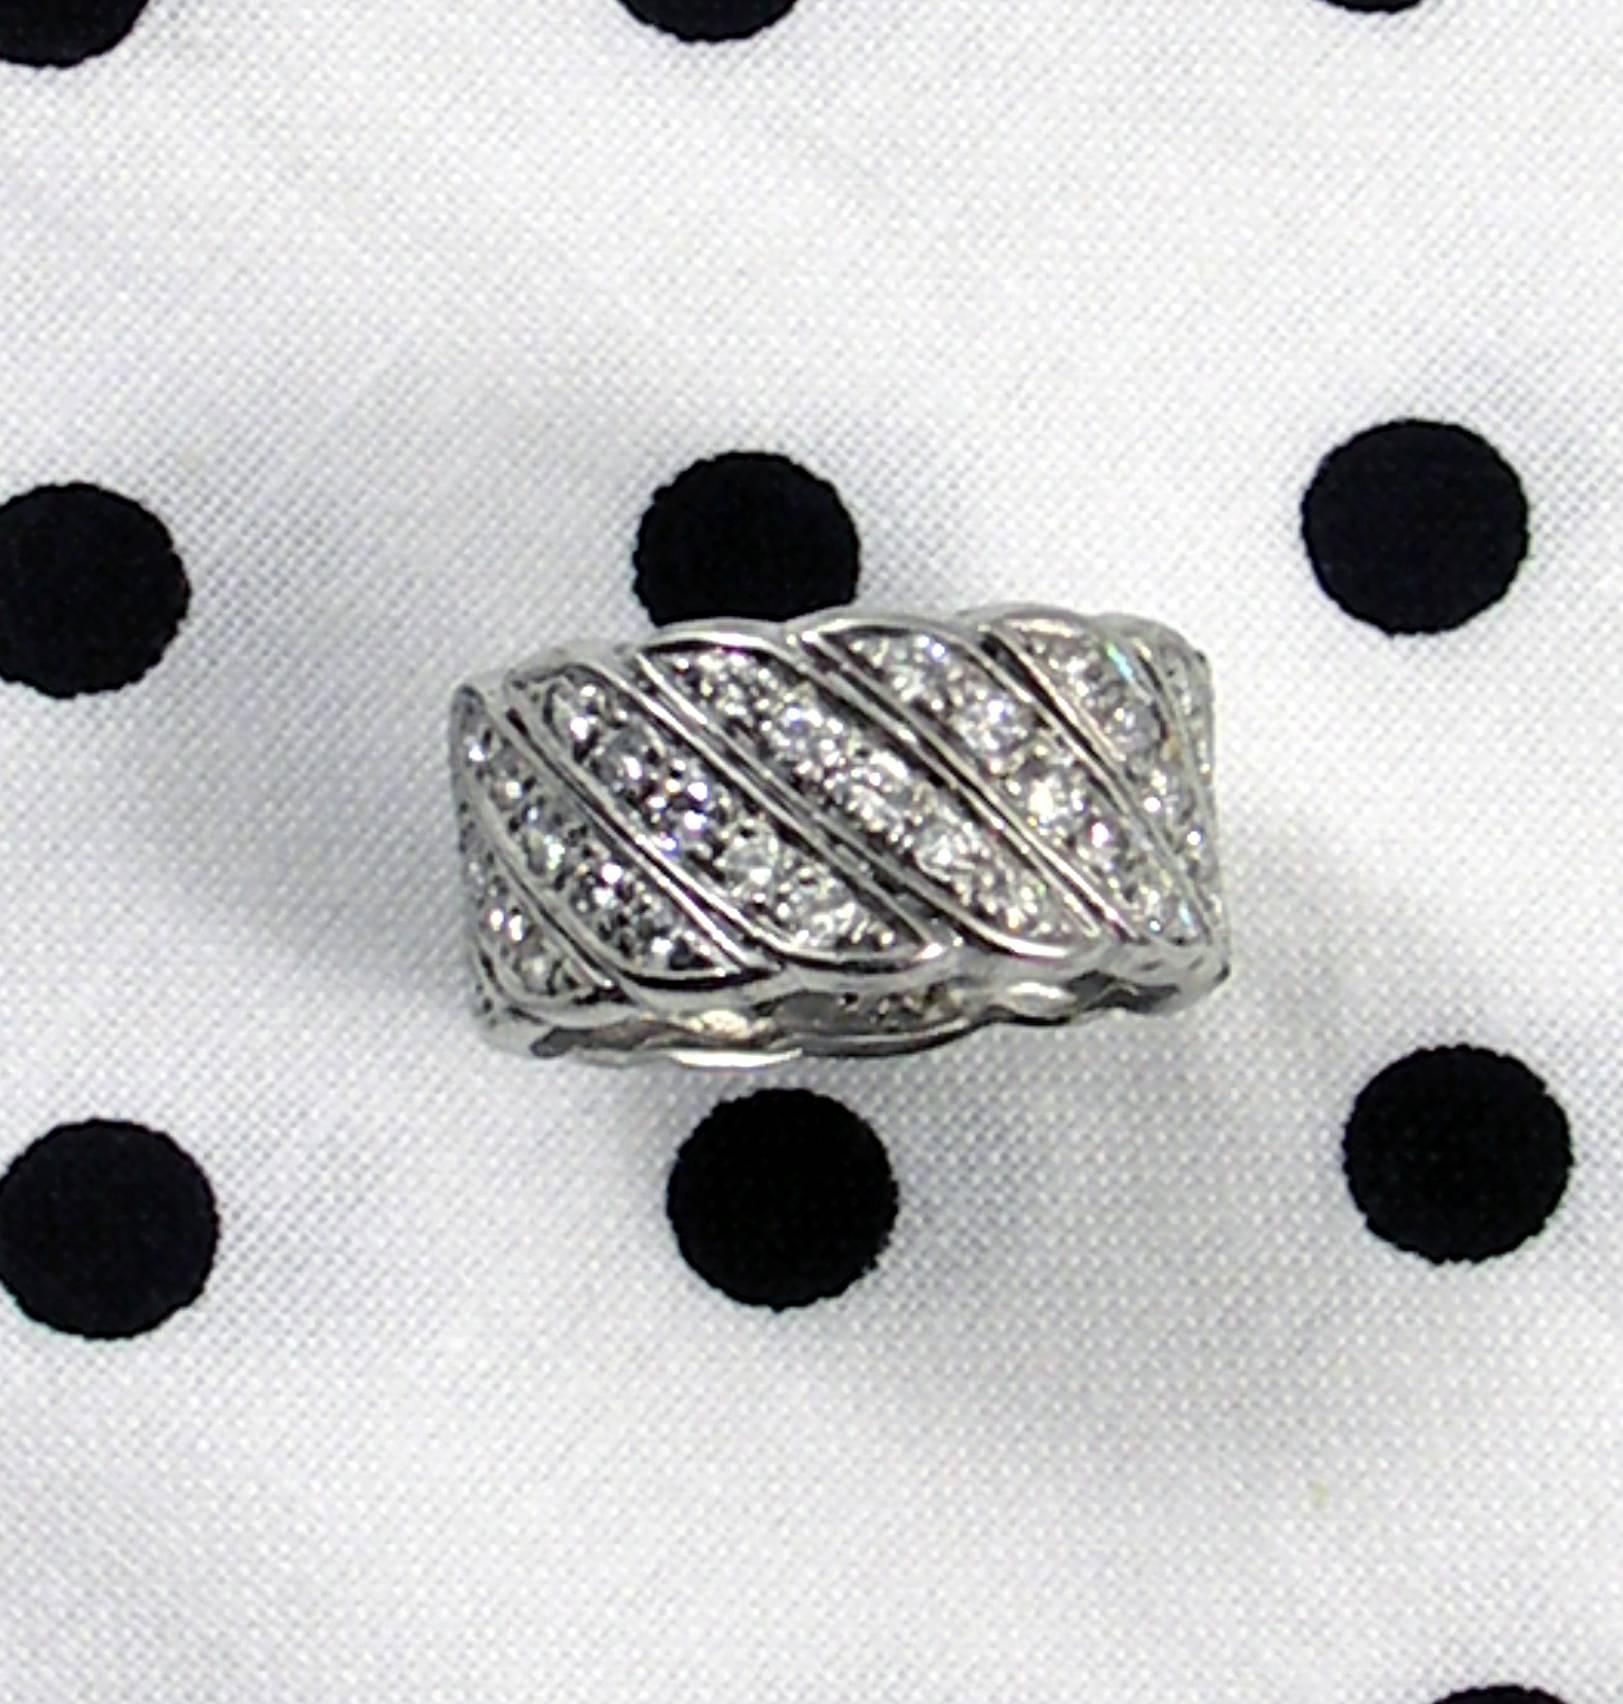 A platinum band set with 70 round brilliant cut diamonds weighing 2ct total approximate weight.
Size 7